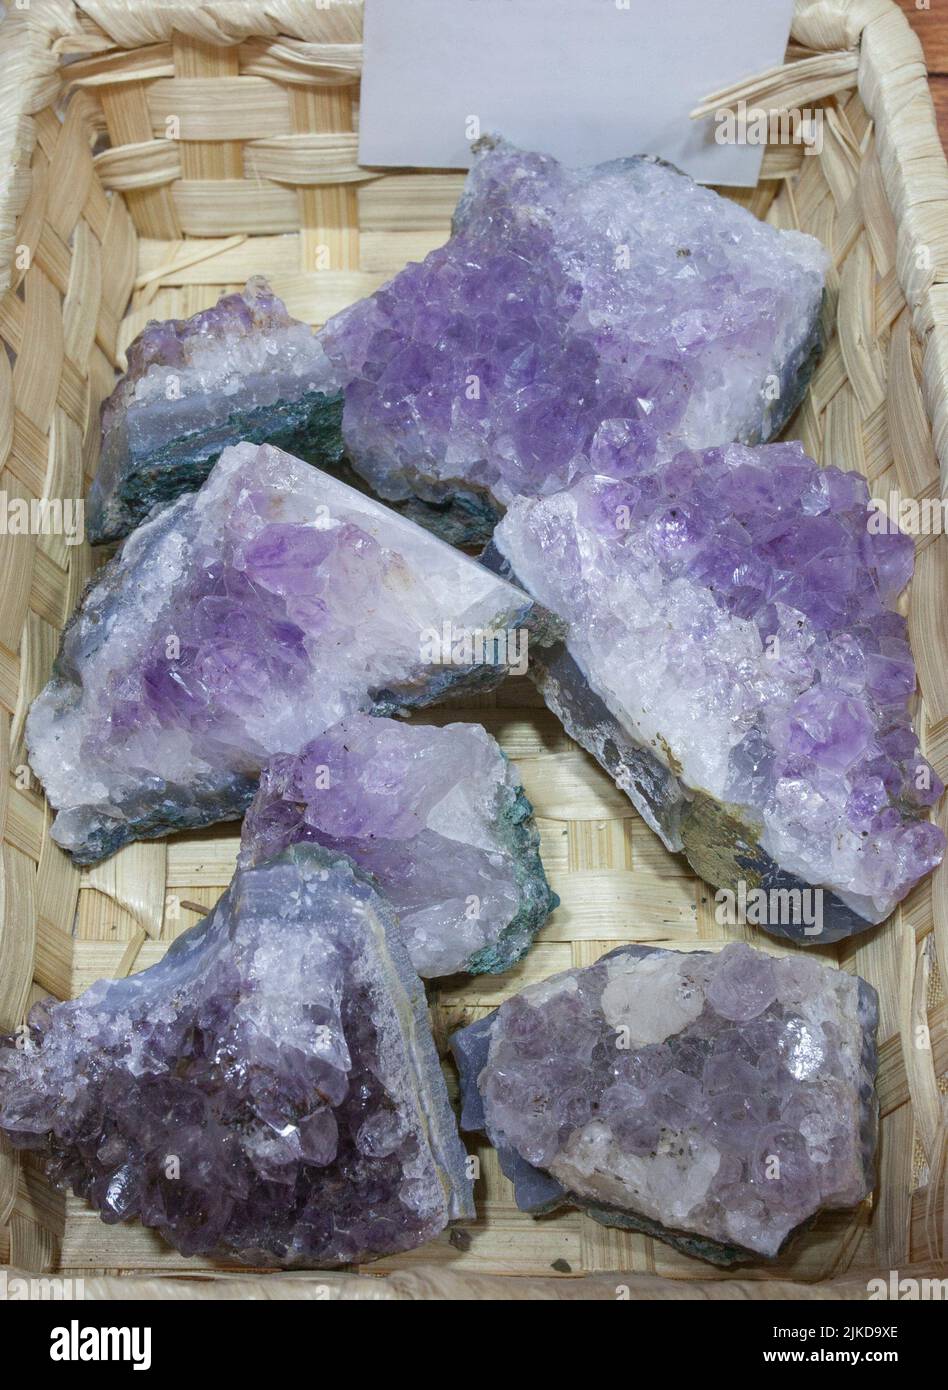 Amethyst Fragments, believed to have beneficial health properties. Displayed on basket at street market stall. Stock Photo